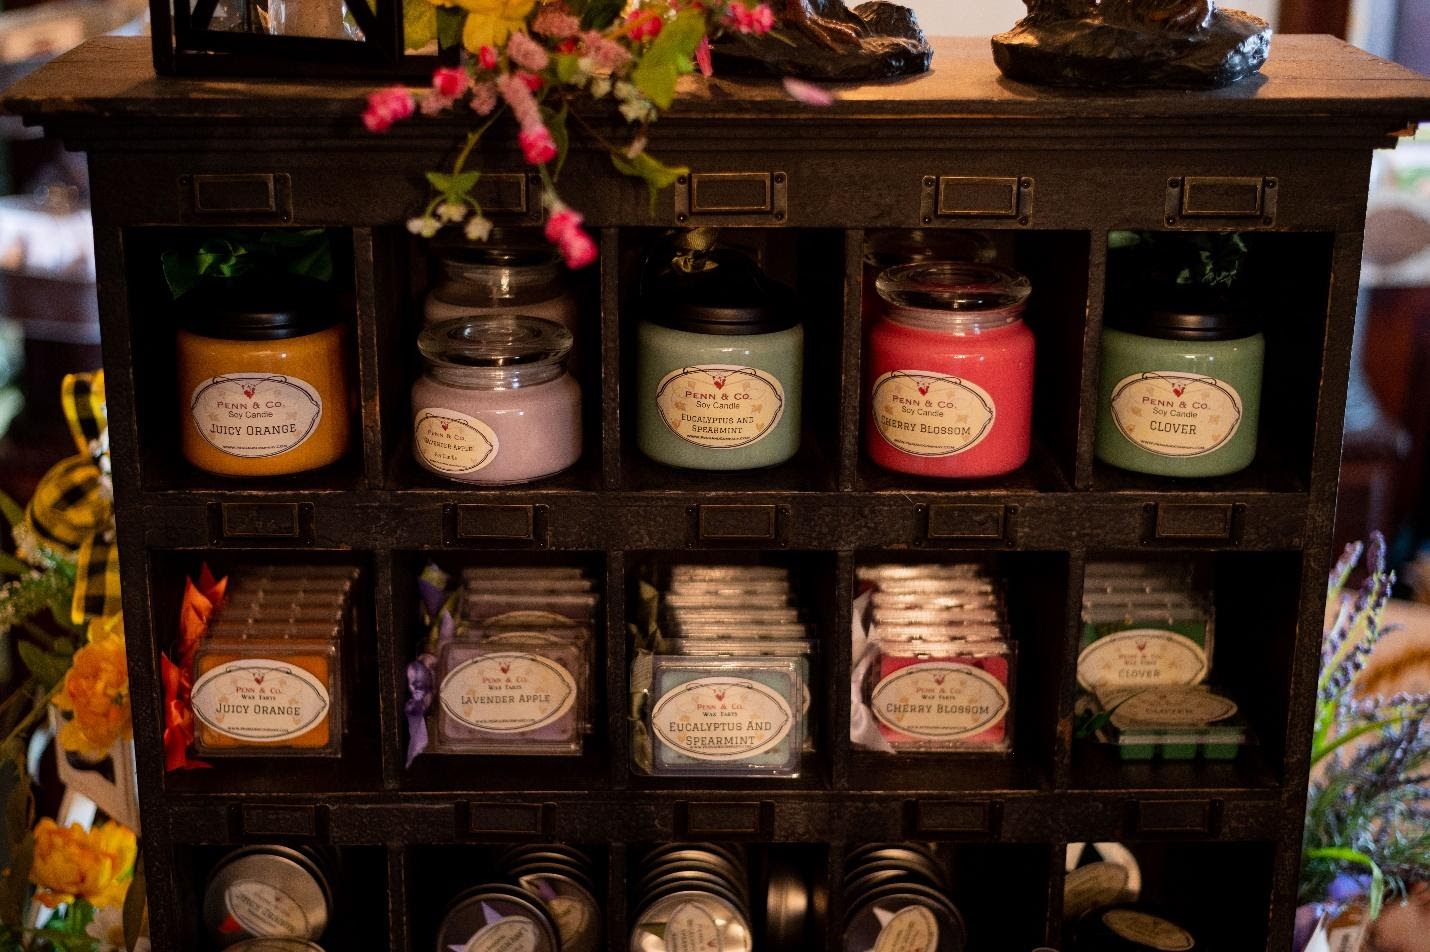 Creating specialty fragrances makes good business scents for Penn & Co.